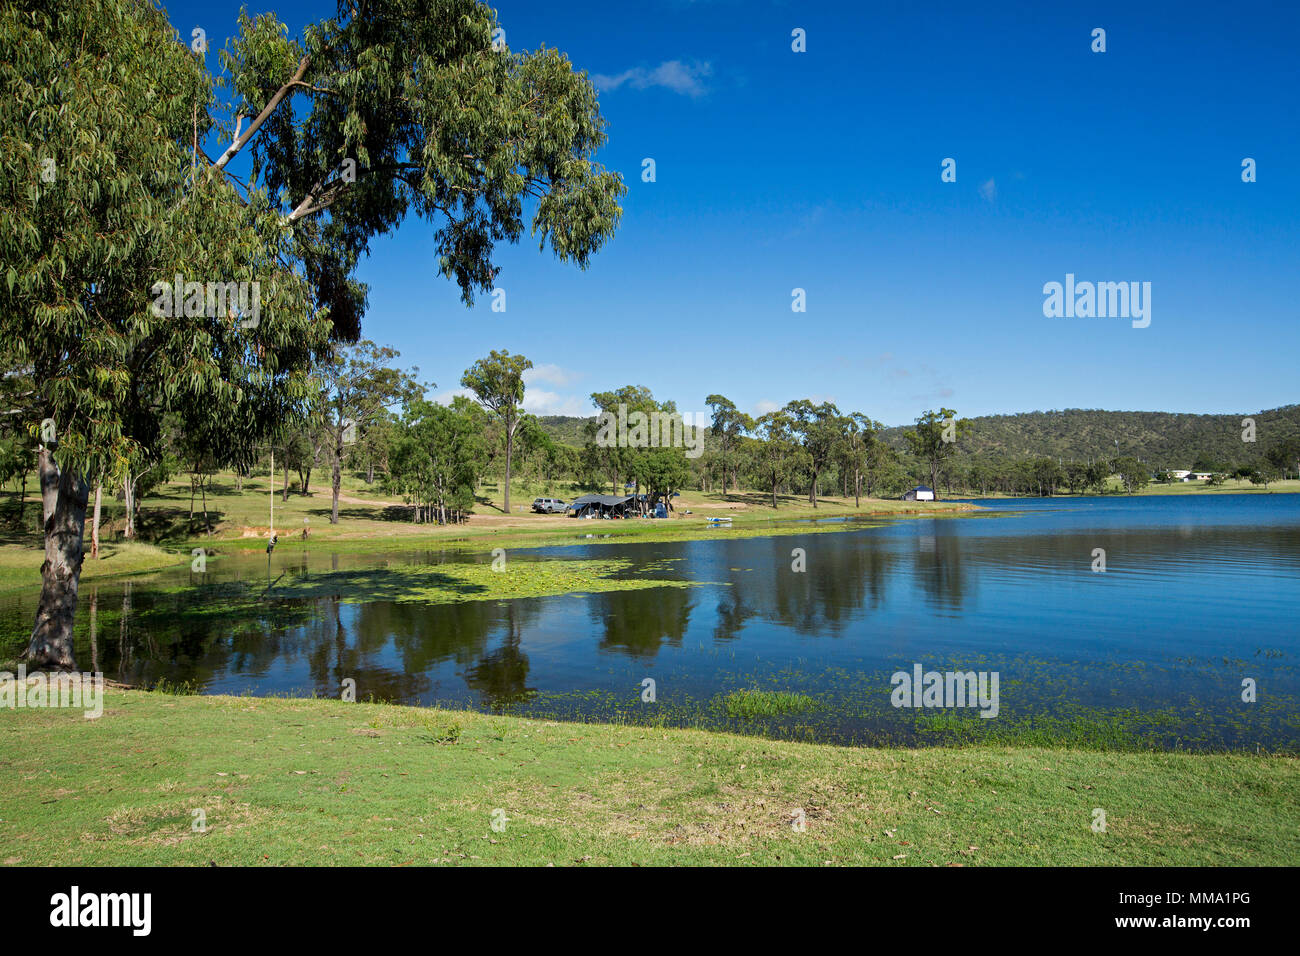 Colourful landscape with calm blue water of Eungalla dam hemmed by emerald grass & shading trees under blue sky with campers on distant bank Qld Aust Stock Photo